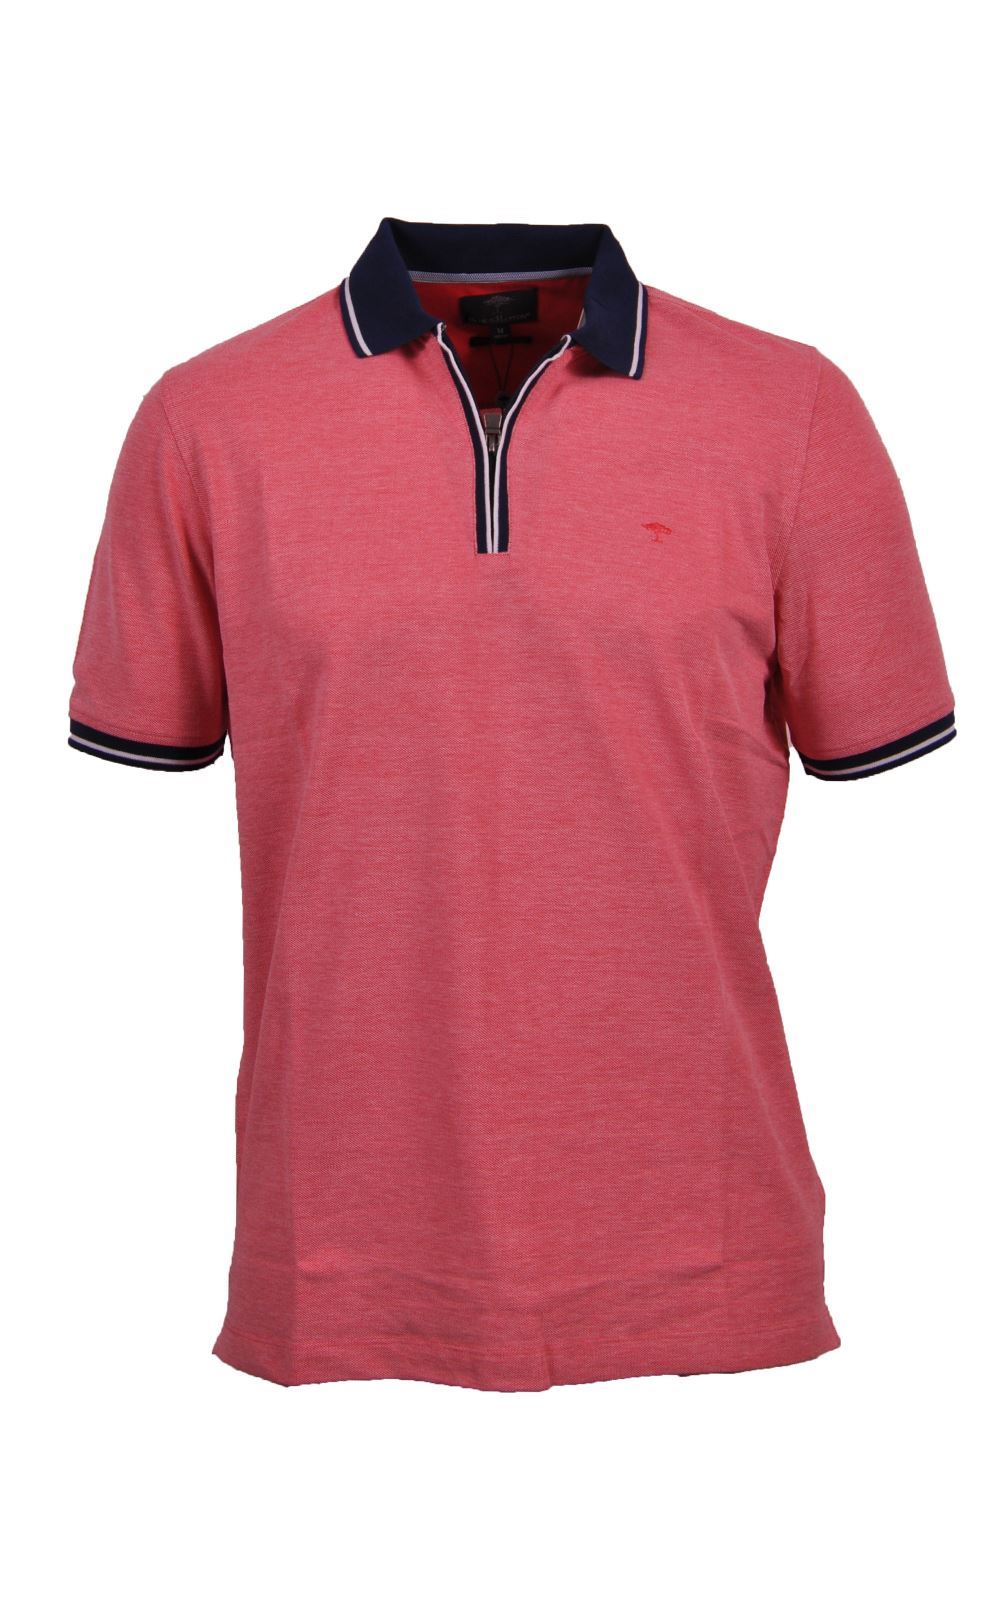 Picture of Fynch -Hatton Zip Polo Shirt 1120-1754